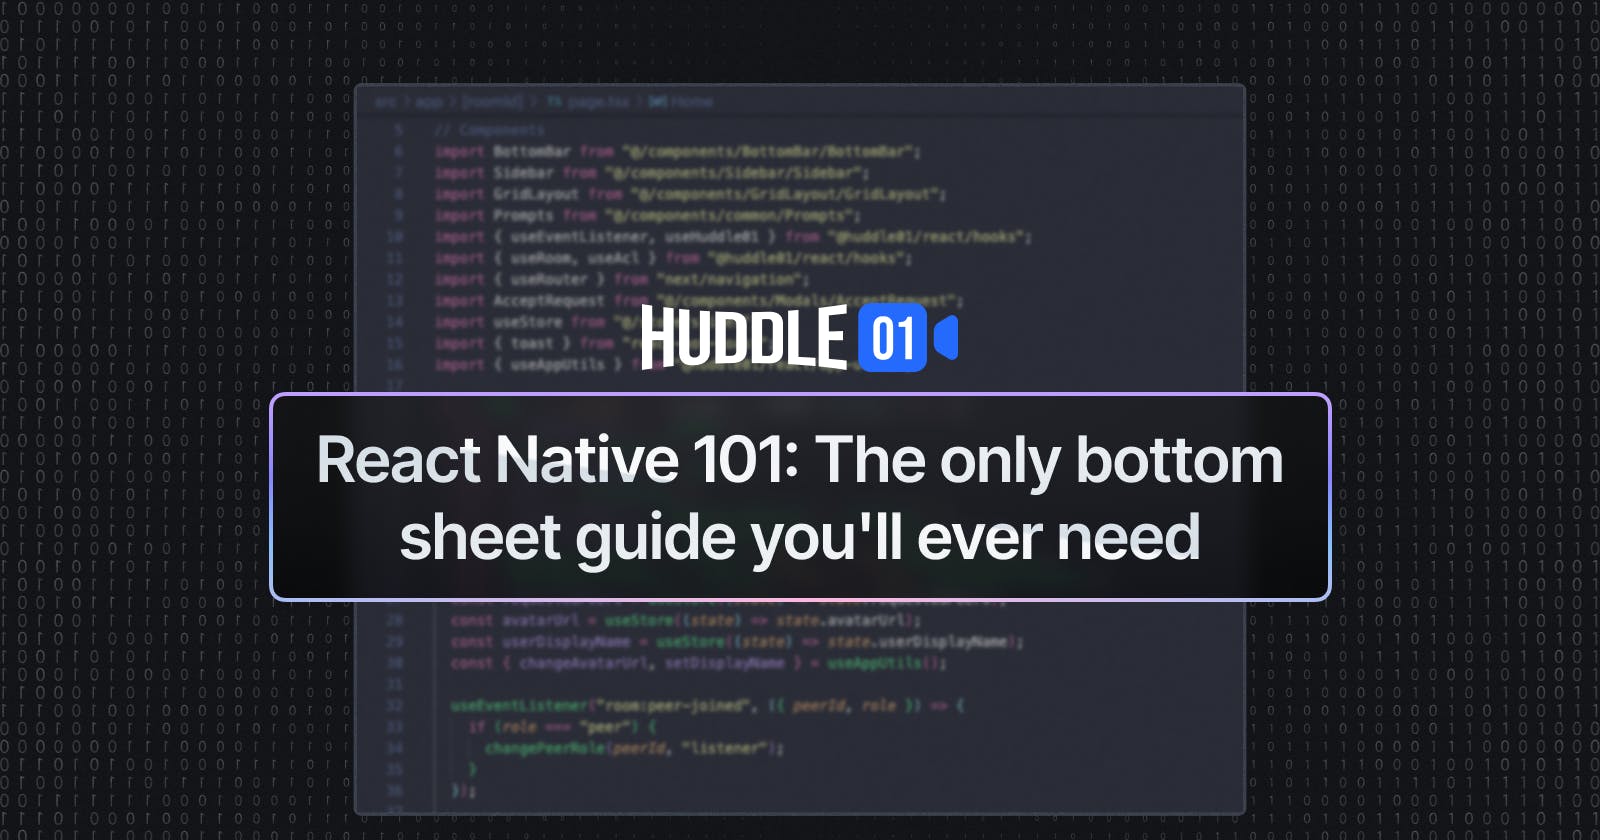 React Native 101: The only bottom sheet guide you'll ever need